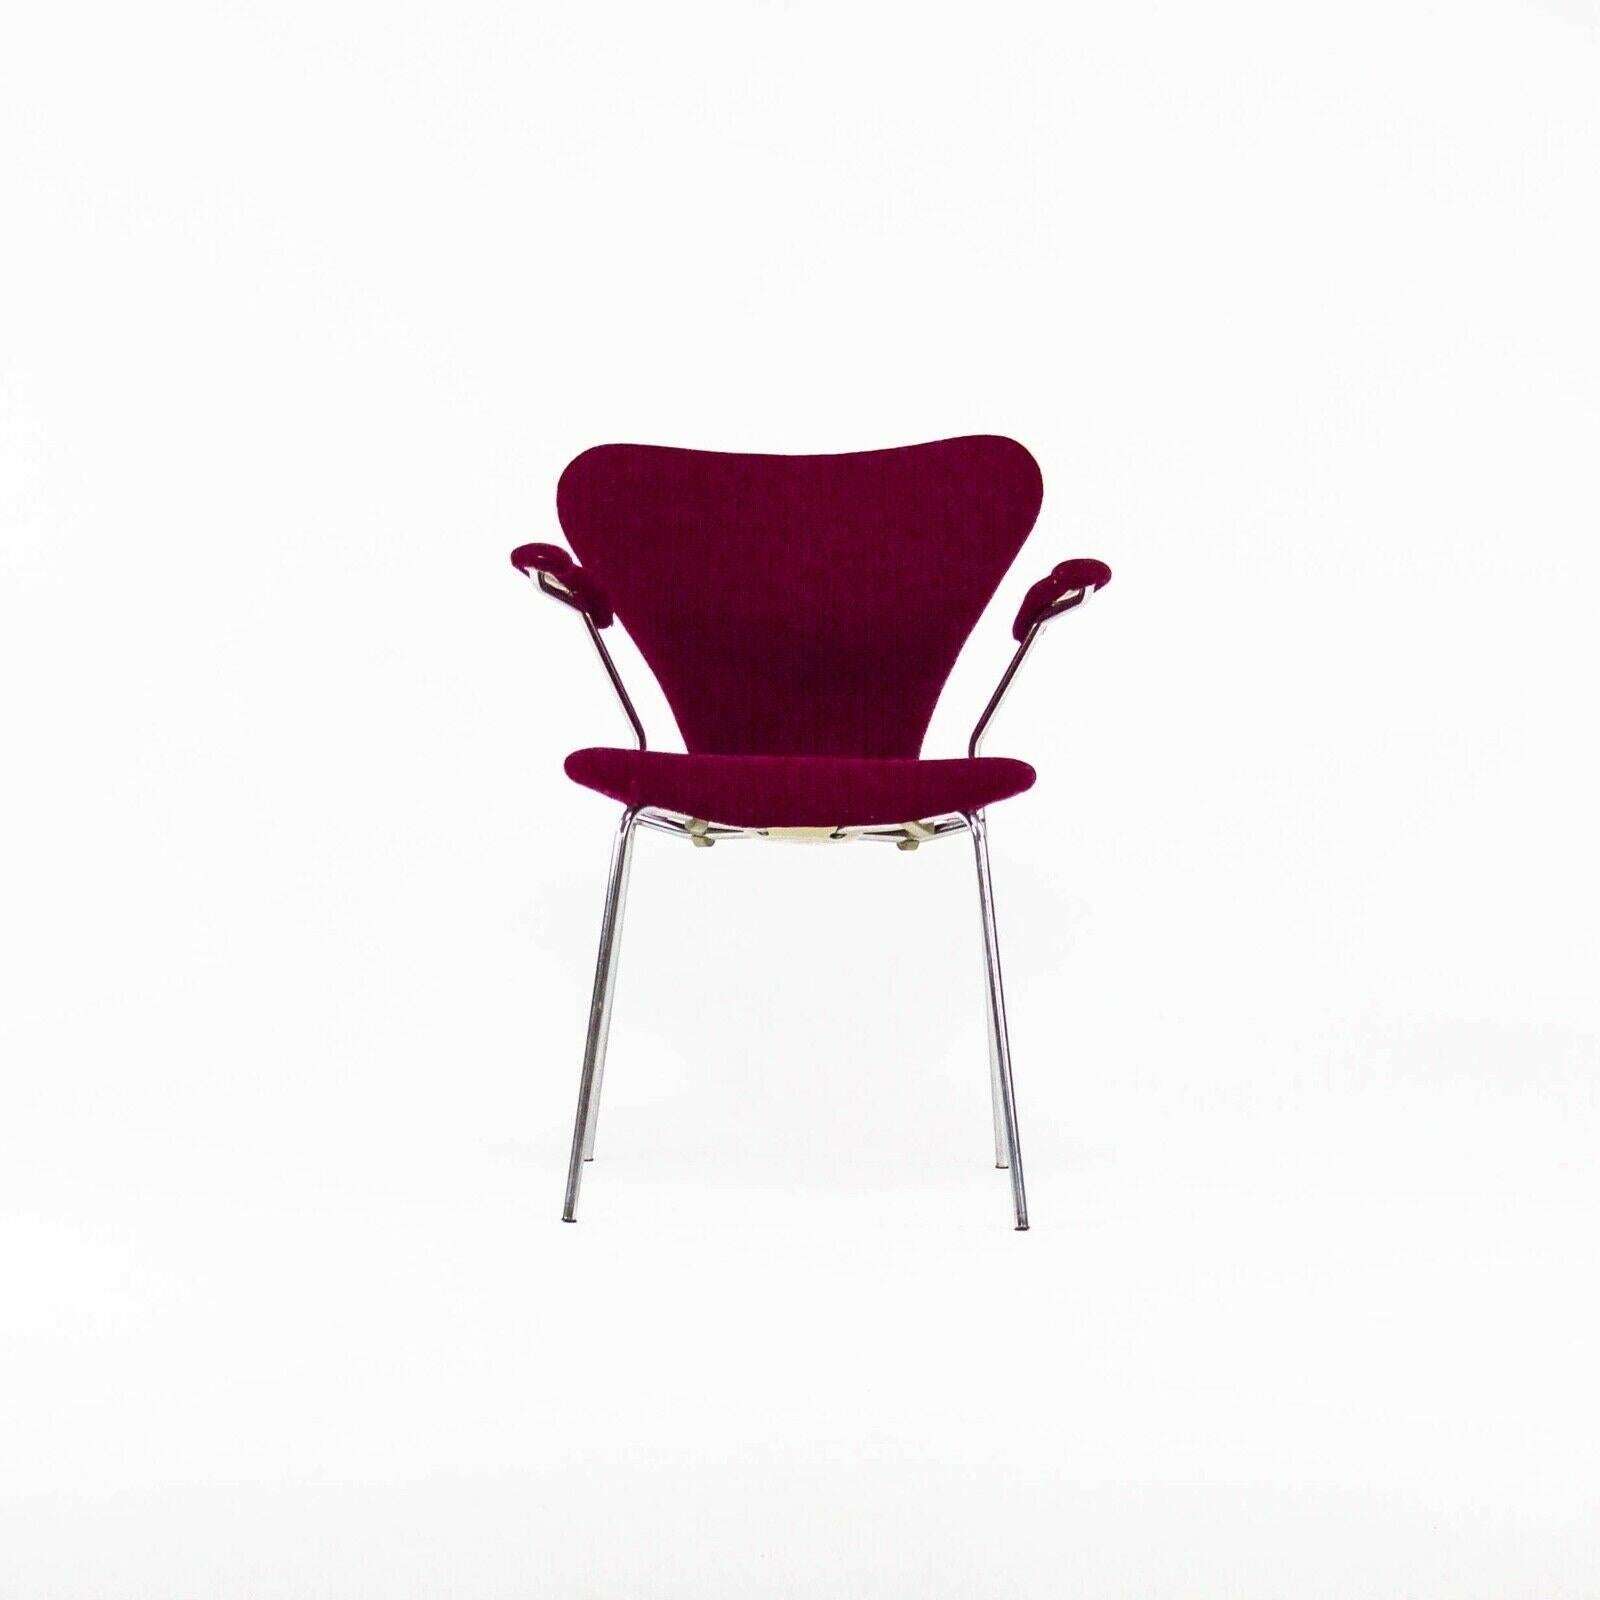 Listed for sale is a set of three Series 7 chairs with arms, designed by renowned architect Arne Jacobsen, produced by Fritz Hansen. These examples came from a Boston/Cambridge area estate and were produced in 1976. These appear to have been